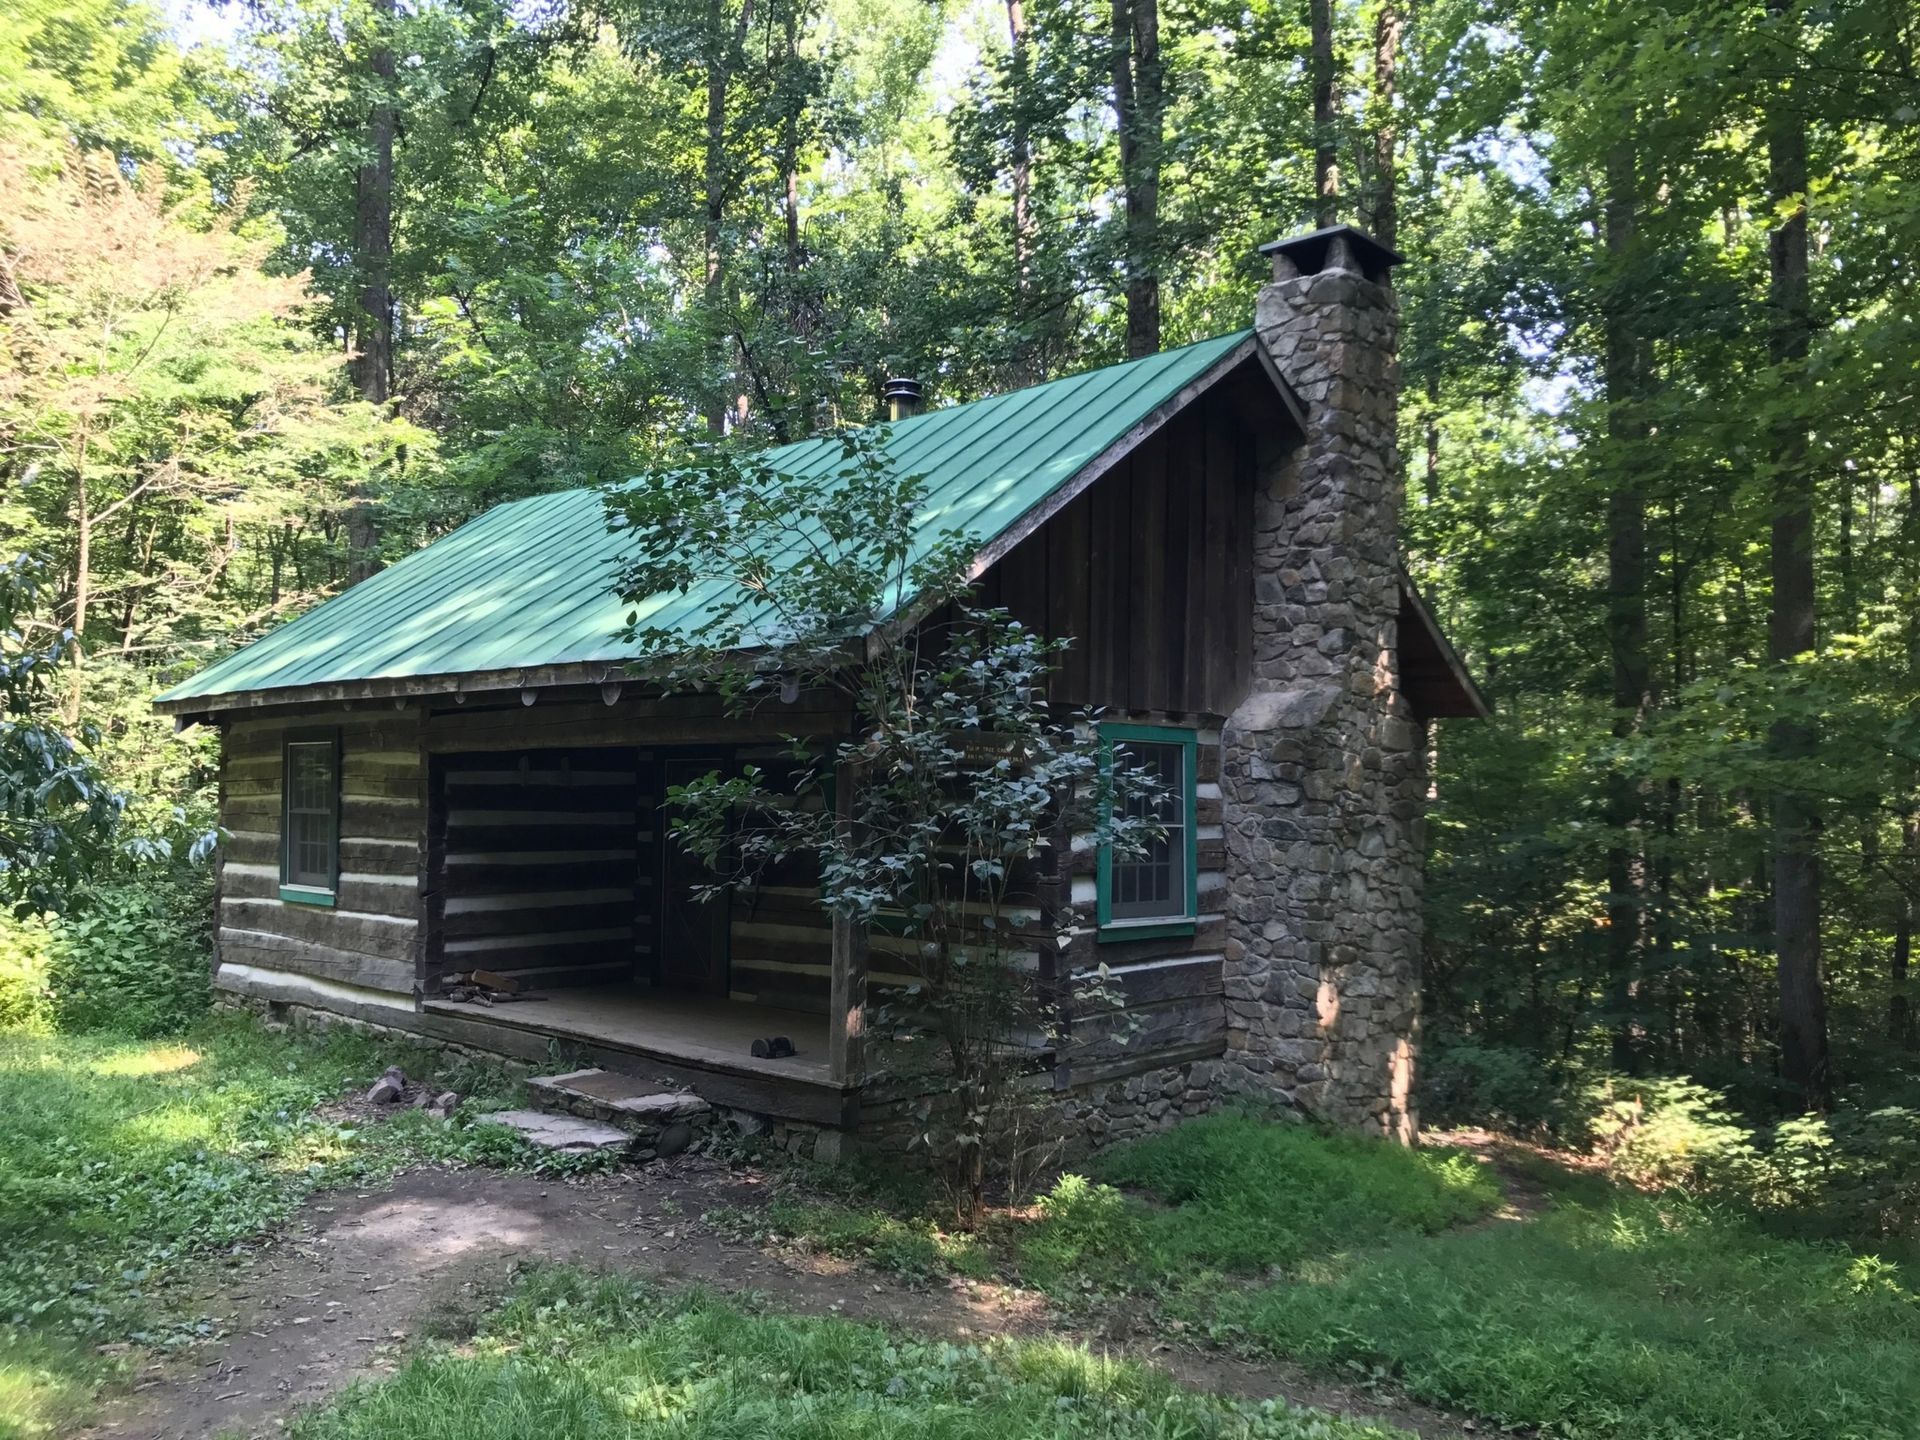 An exterior view of Tulip Tree cabin shows a small wooden porch.